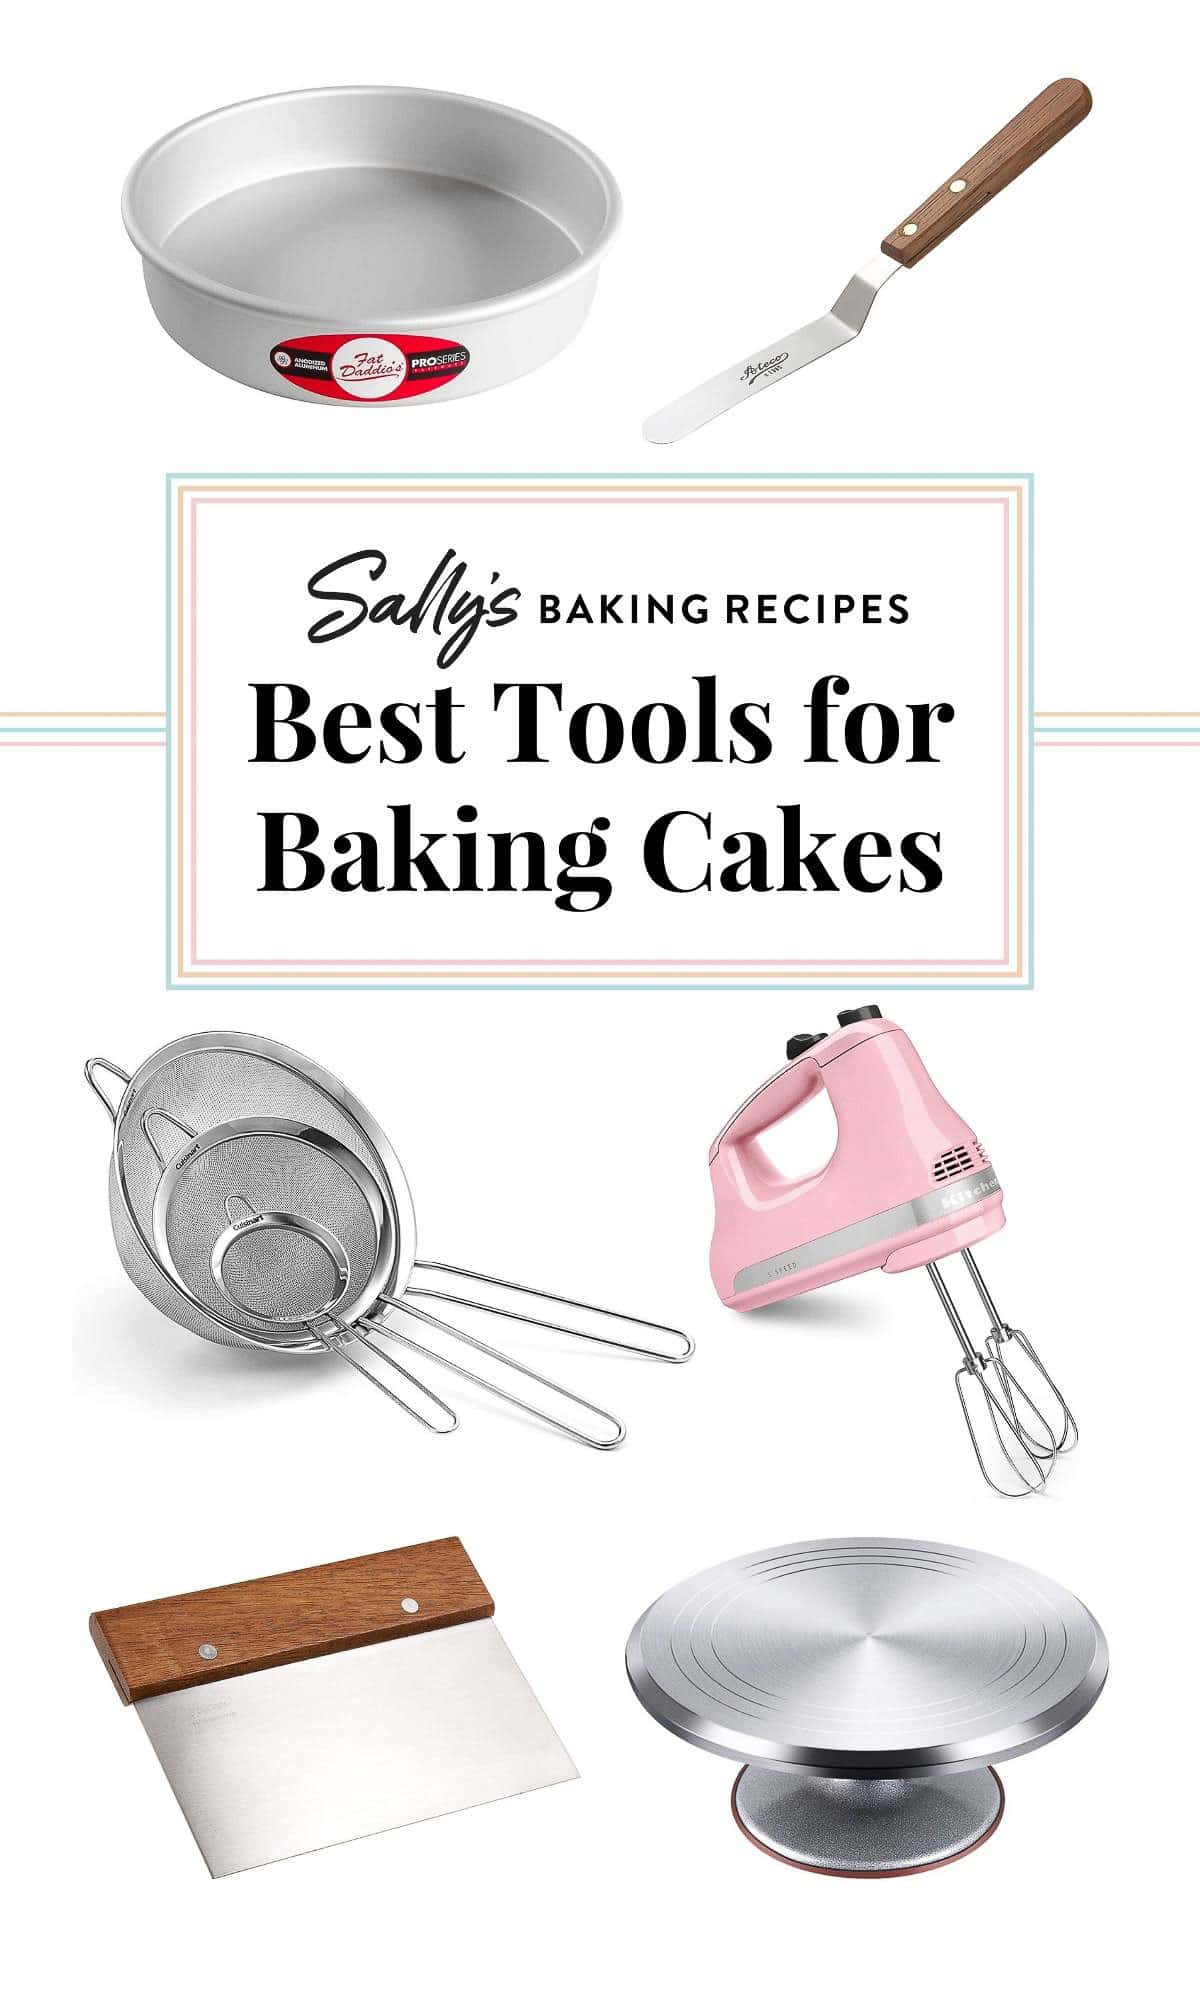 collage of cake baking and decorating tools with Sally's Baking Recipes logo.